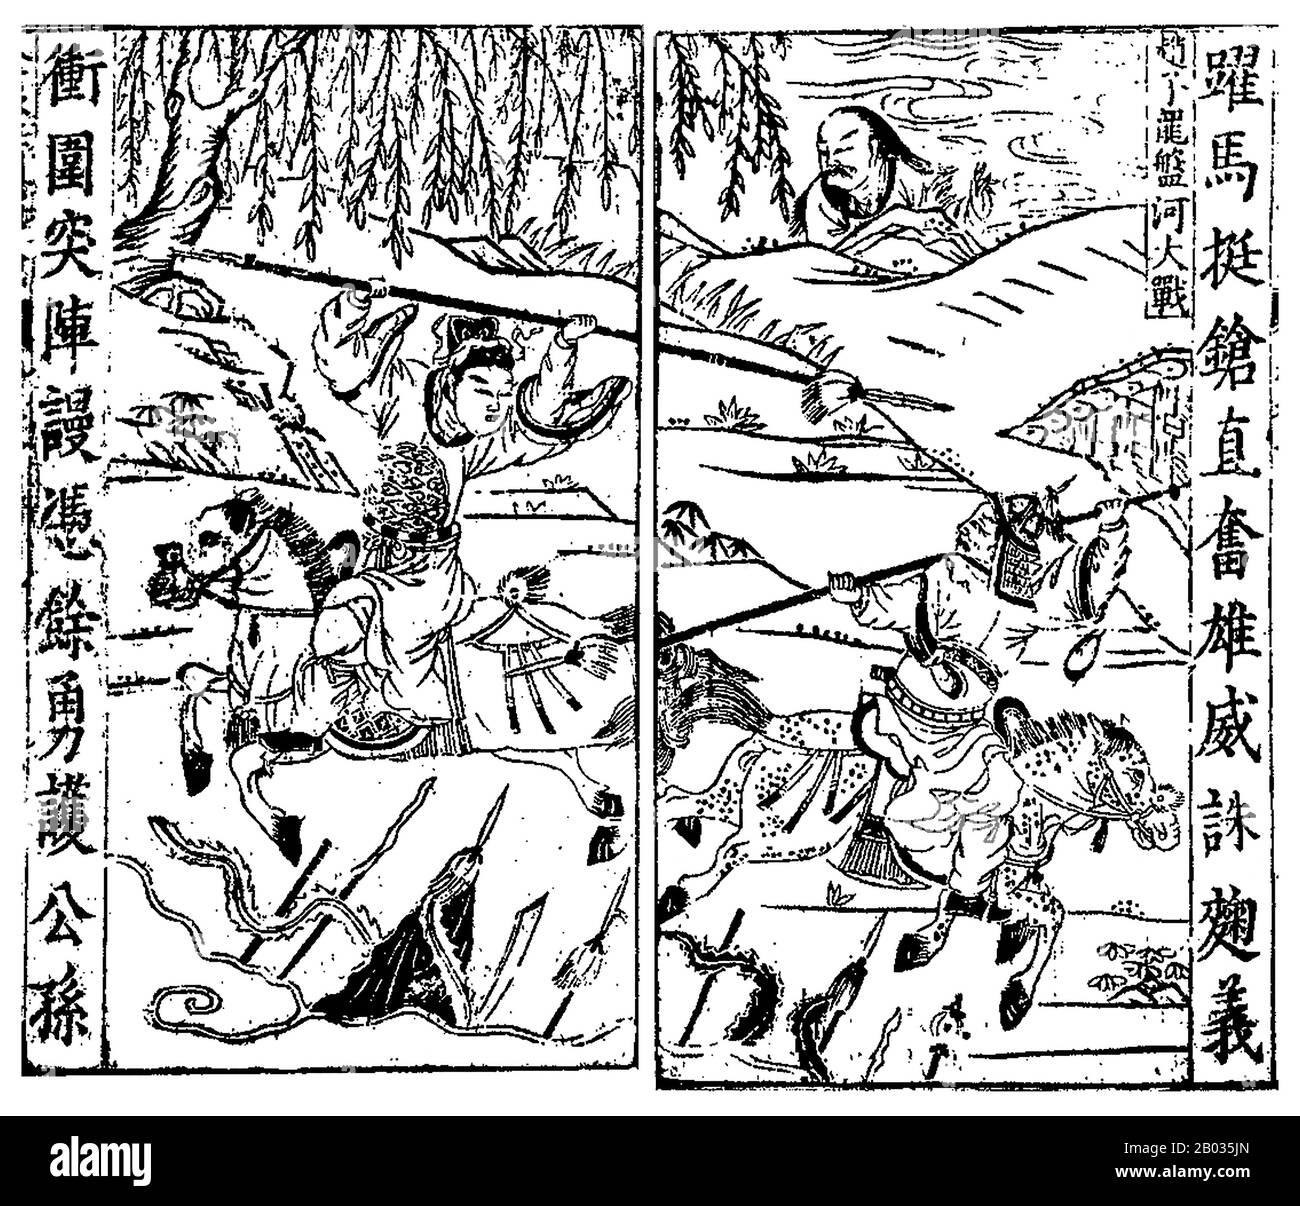 Zhao Yun (-229 CE), courtesy name Zilong, was a military general during the Eastern Han dynasty and early Three Kingdoms period. He originally served under the northern warlord Gongsun Zan before later leaving to serve Liu Bei instead.  Under Liu Bei, he took part in many of the aspiring emperor-to-be's exploits, from the Battle of Changban to the Hanzhong Campaign. After the formation of the Shu Han state and Liu Bei's death, he still continued to fight, participating in the first of Zhuge Liang's Northern Expeditions, until he eventually died in 229 CE.  Little information is given about Zha Stock Photo